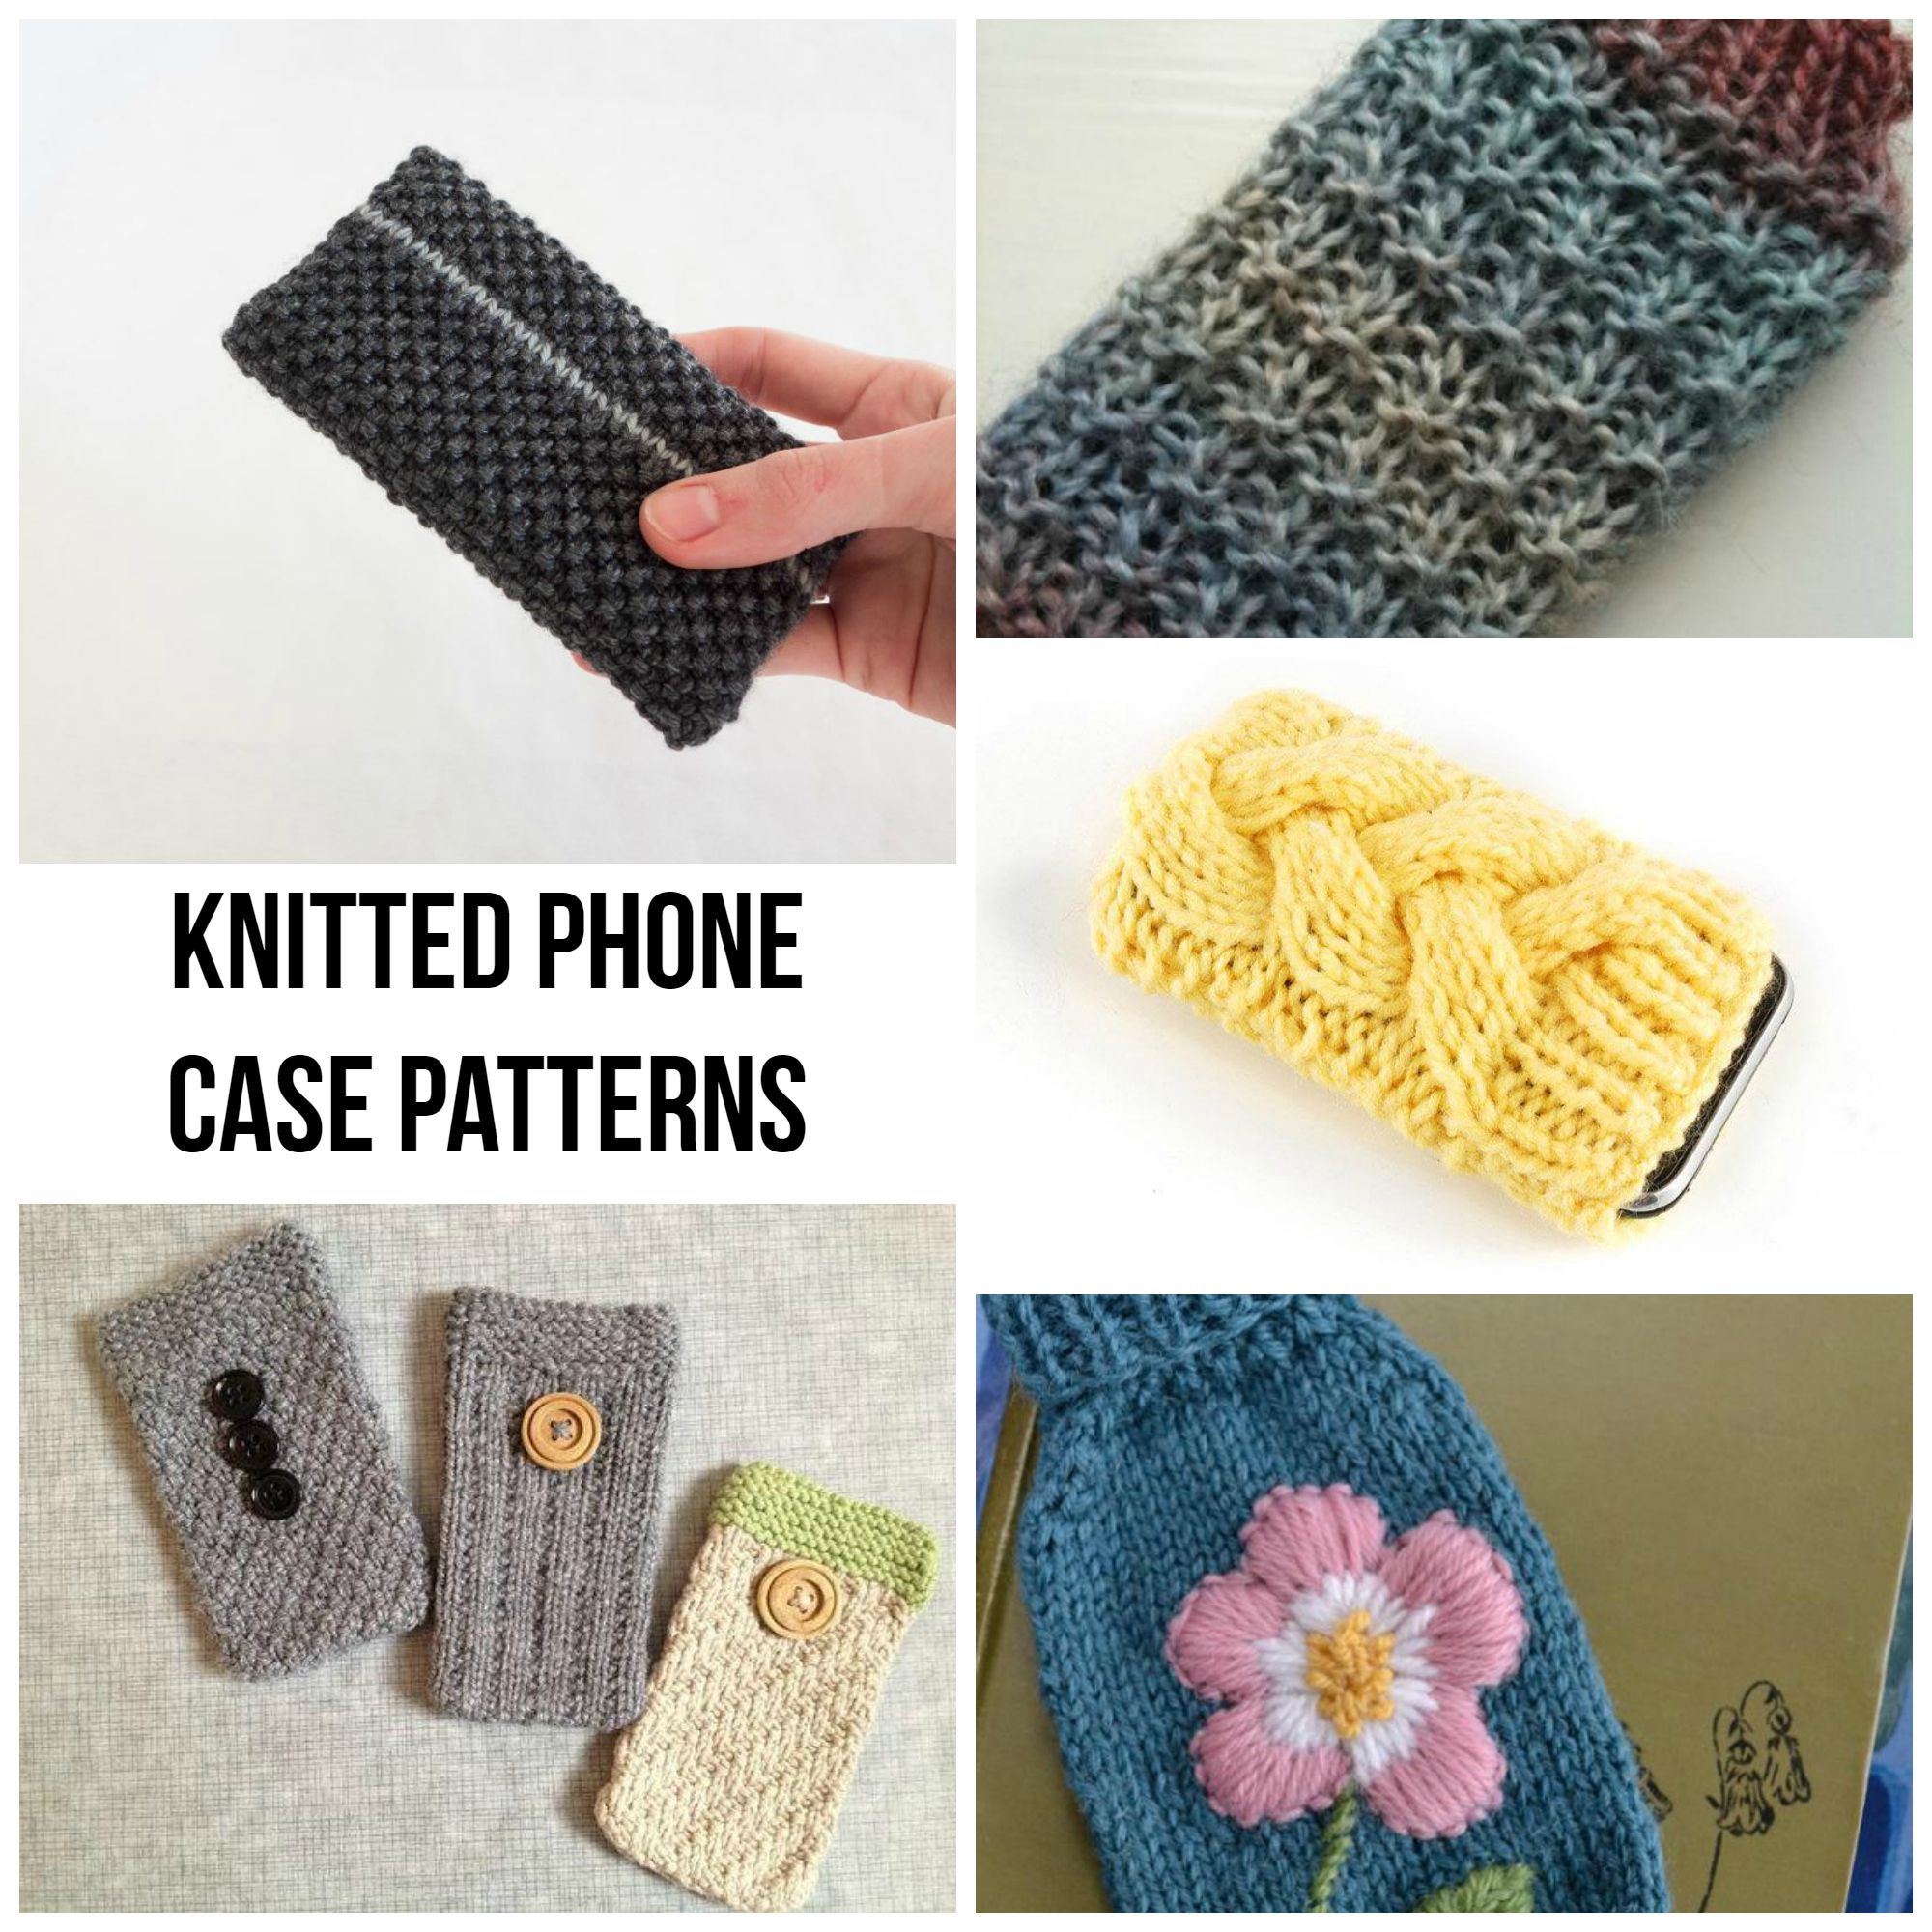 Patterns To Knit Quick Knitted Phone Case Patterns Craftsy